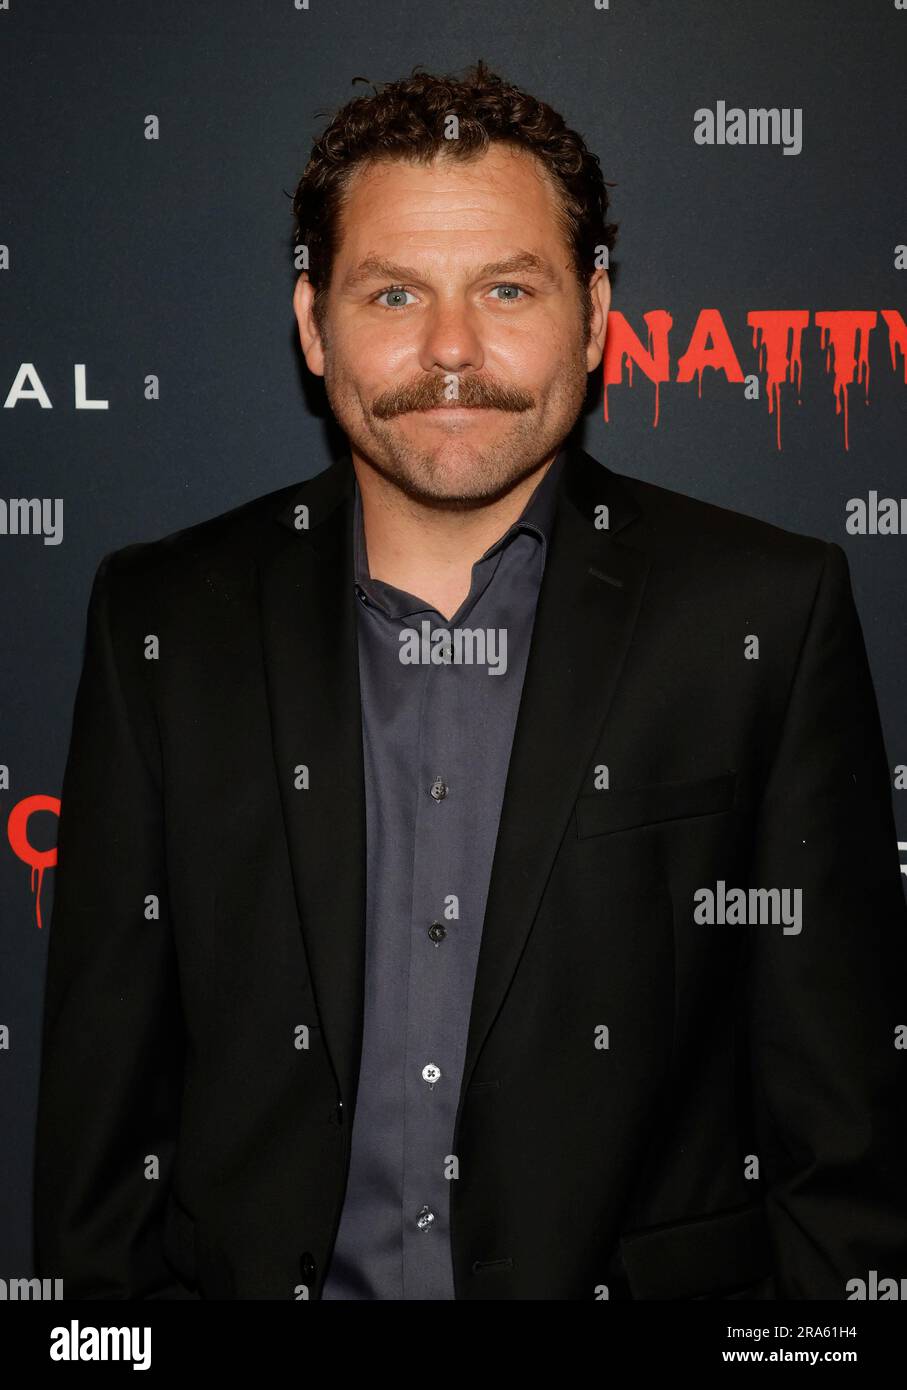 Los Angeles, Ca. 30th June, 2023. Jason James Richter at The Los Angeles Premiere OF Natty Knocks at Harmony Gold in Los Angeles, California on June 30, 2023. Credit: Faye Sadou/Media Punch/Alamy Live News Stock Photo